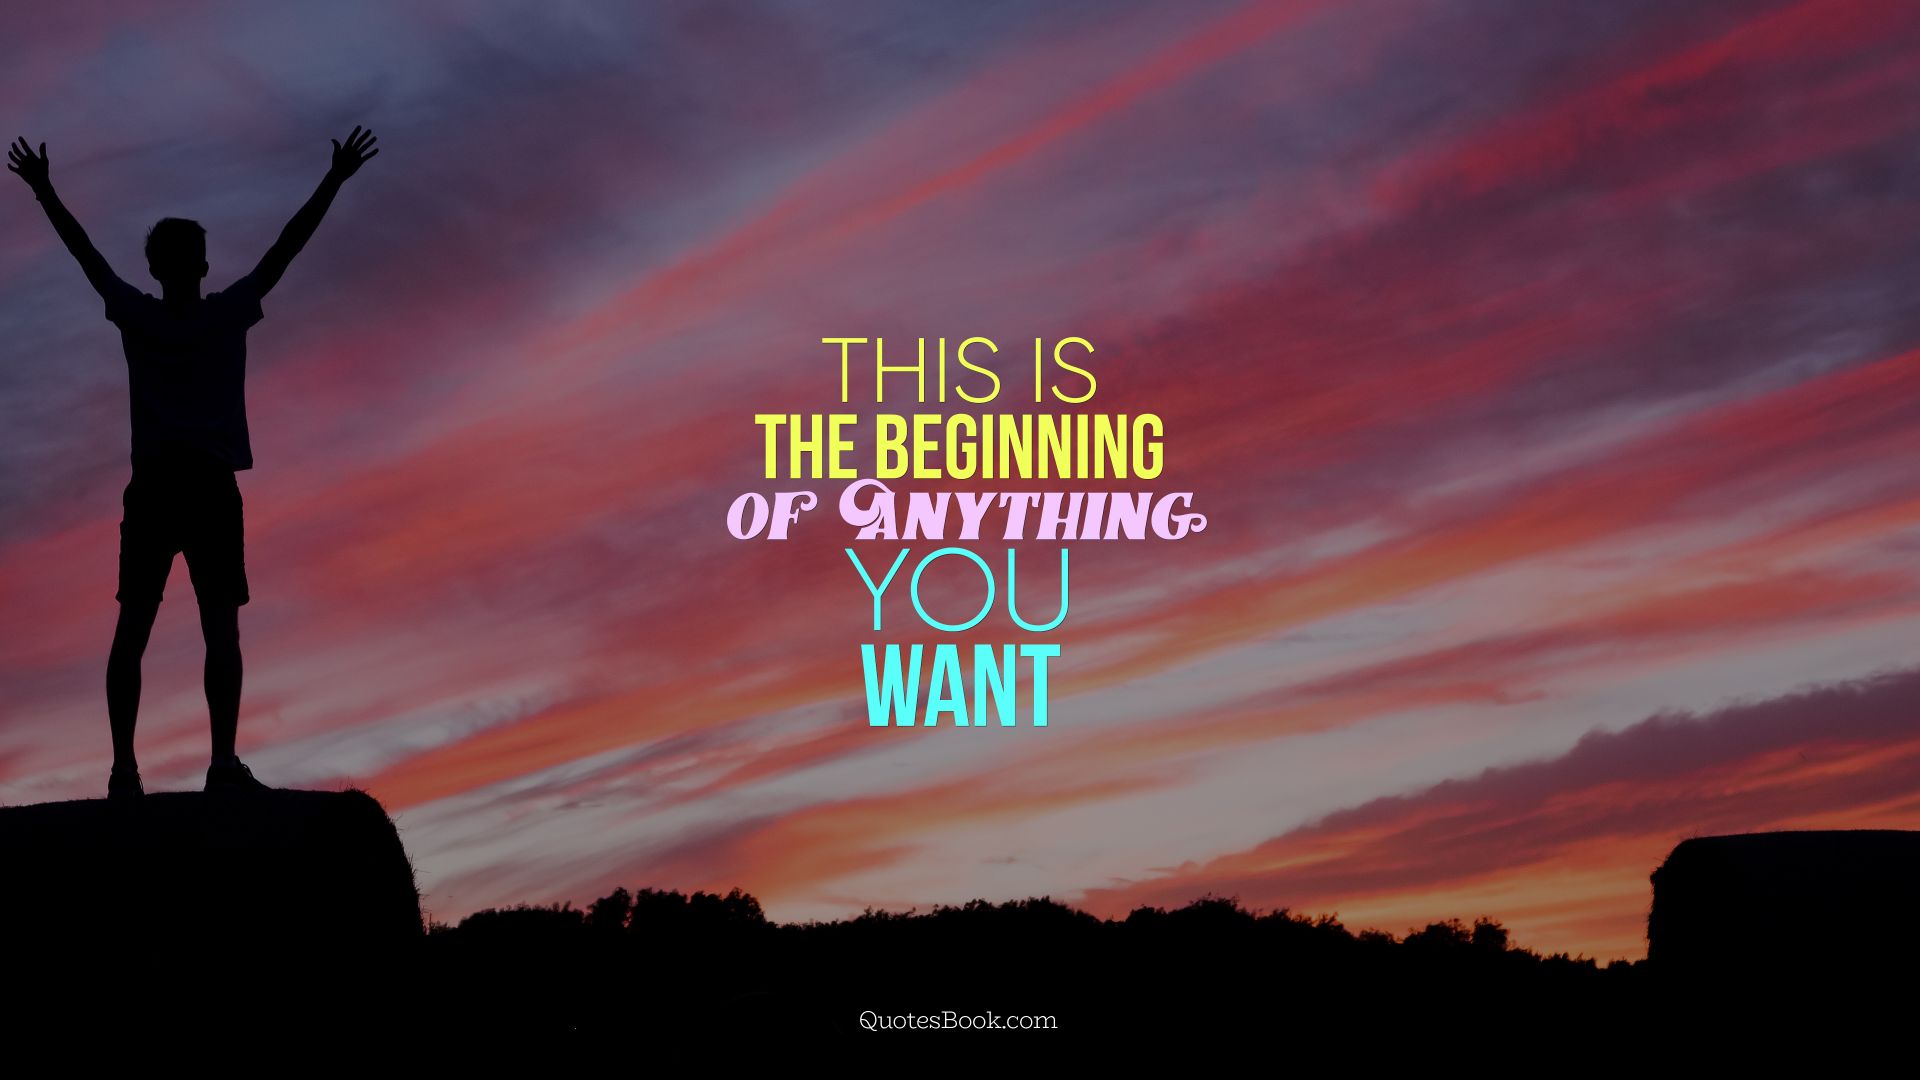 This is the beginning of anything you want